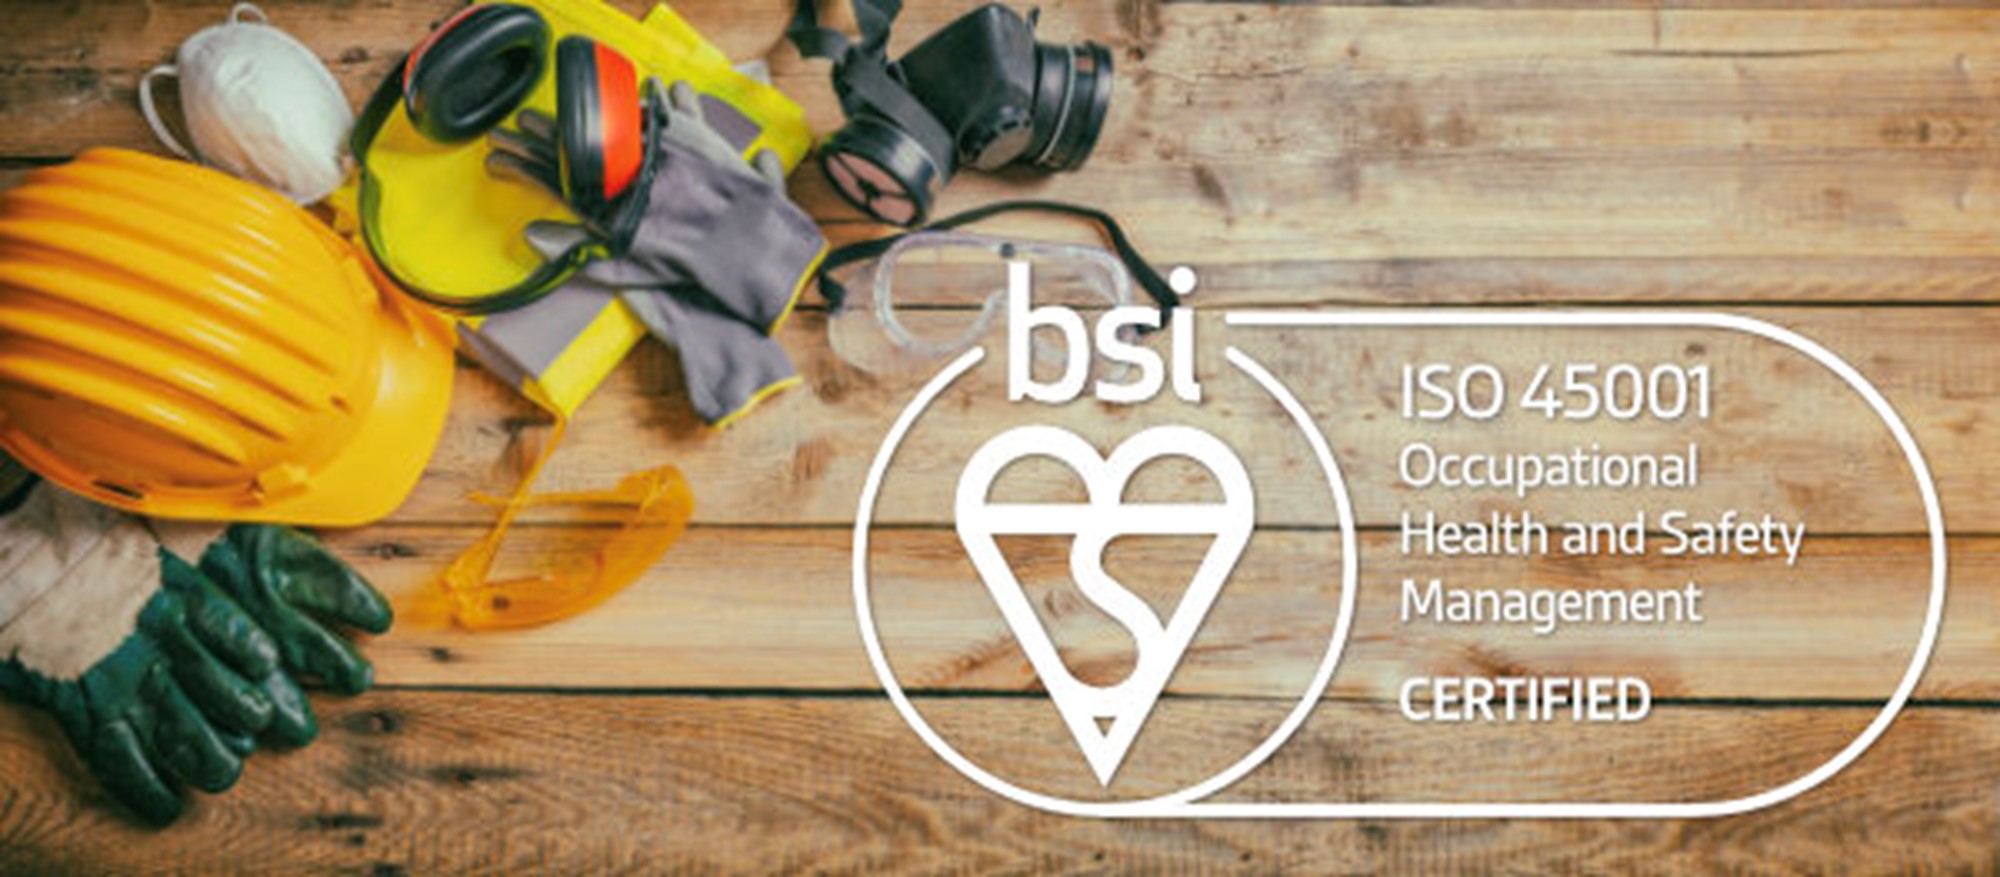 BSI - ISO 45001 - Occupational Health and Safety Management Systems